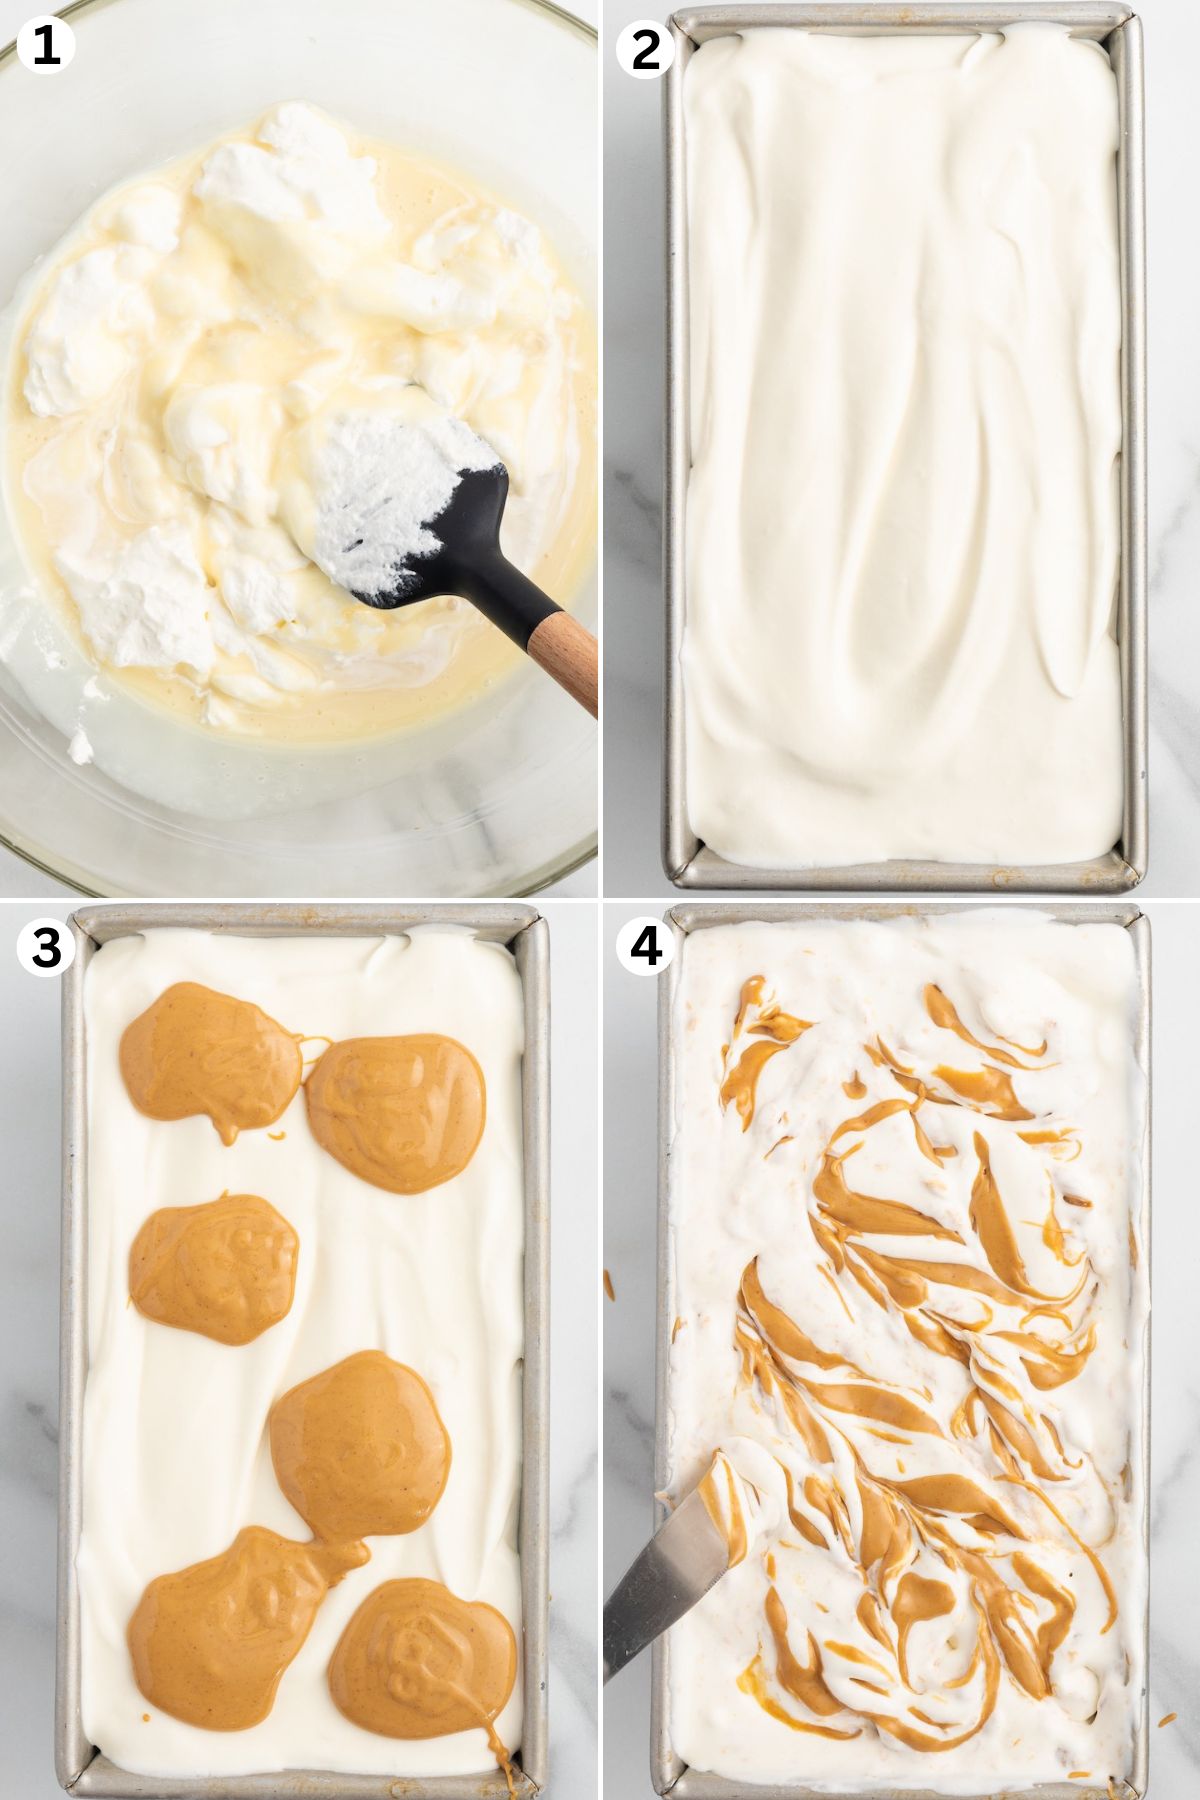 Fold the whipped cream into the bowl of sweetened condensed milk. Spread the ice cream mixture into a loaf pan. Add dollop of peanut butter on top of the ice cream. Swirl the peanut butter into the ice cream.